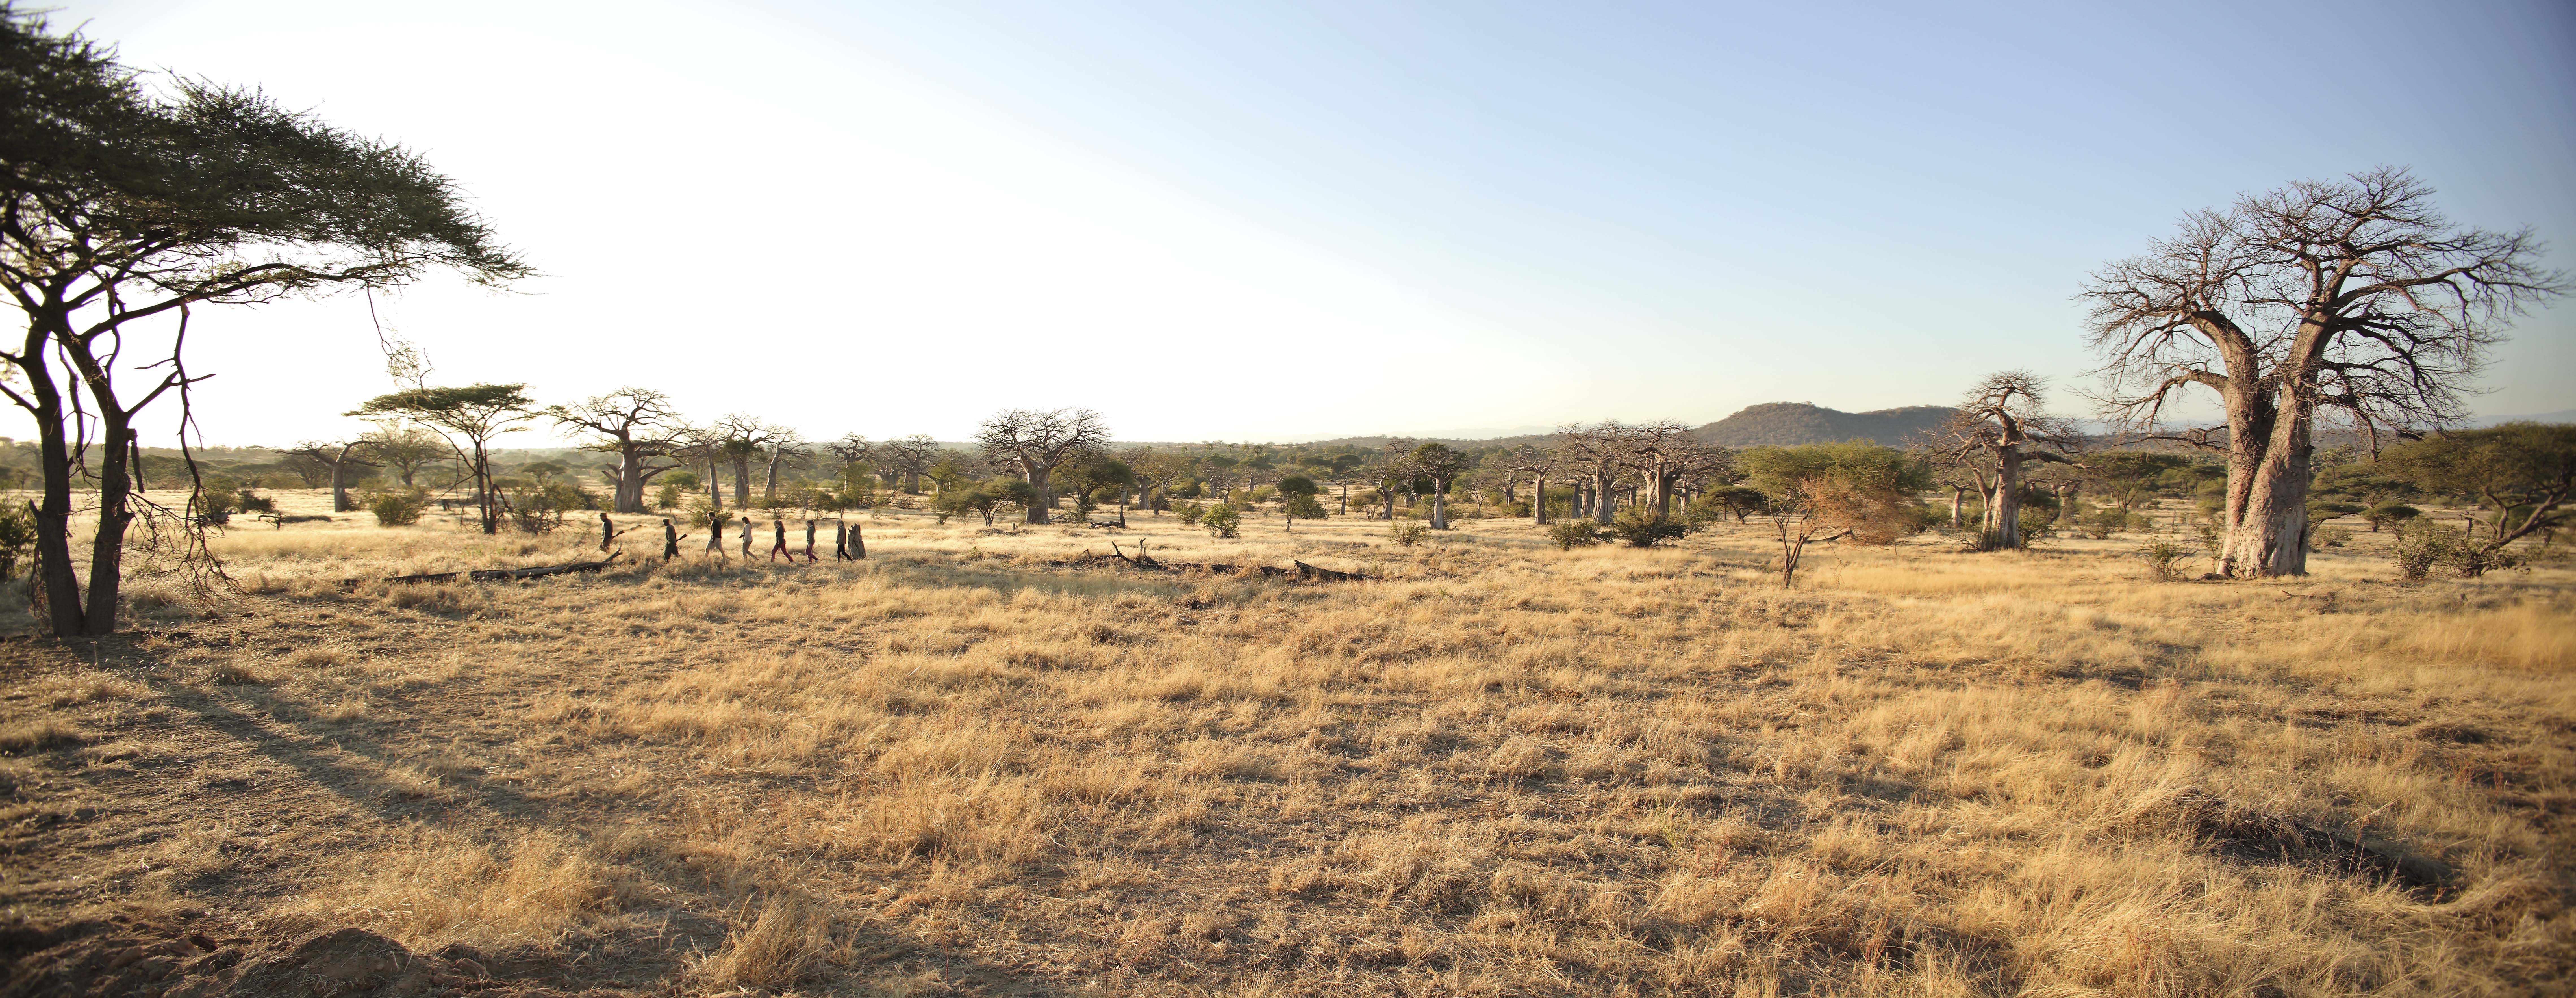 Walking the wilds of Ruaha